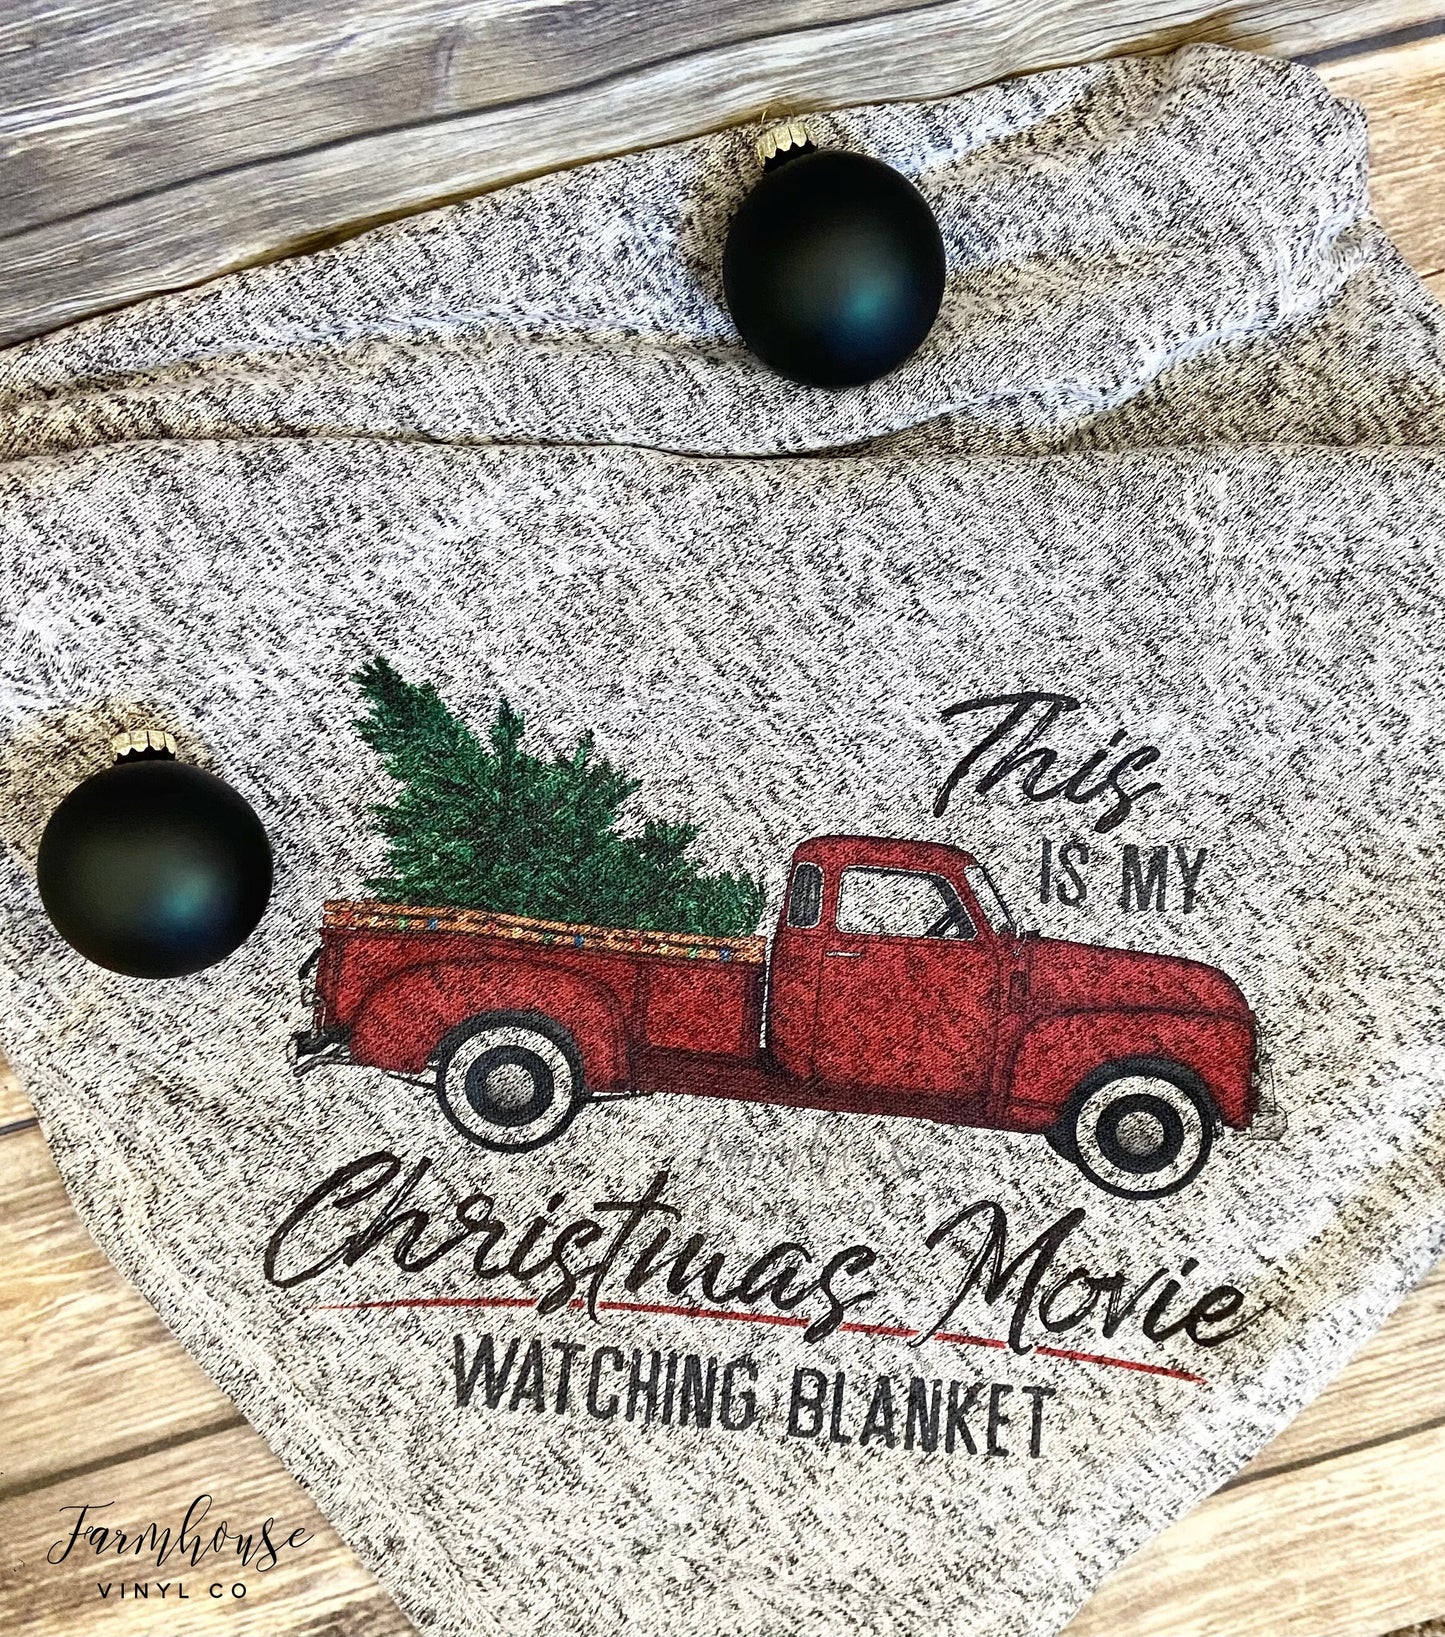 This is My Christmas Movie Watching Blanket / Christmas Gift / Farmhouse Home Decor / Hostess Gift / Cozy Soft Blanket / Christmas Gift Idea - Farmhouse Vinyl Co